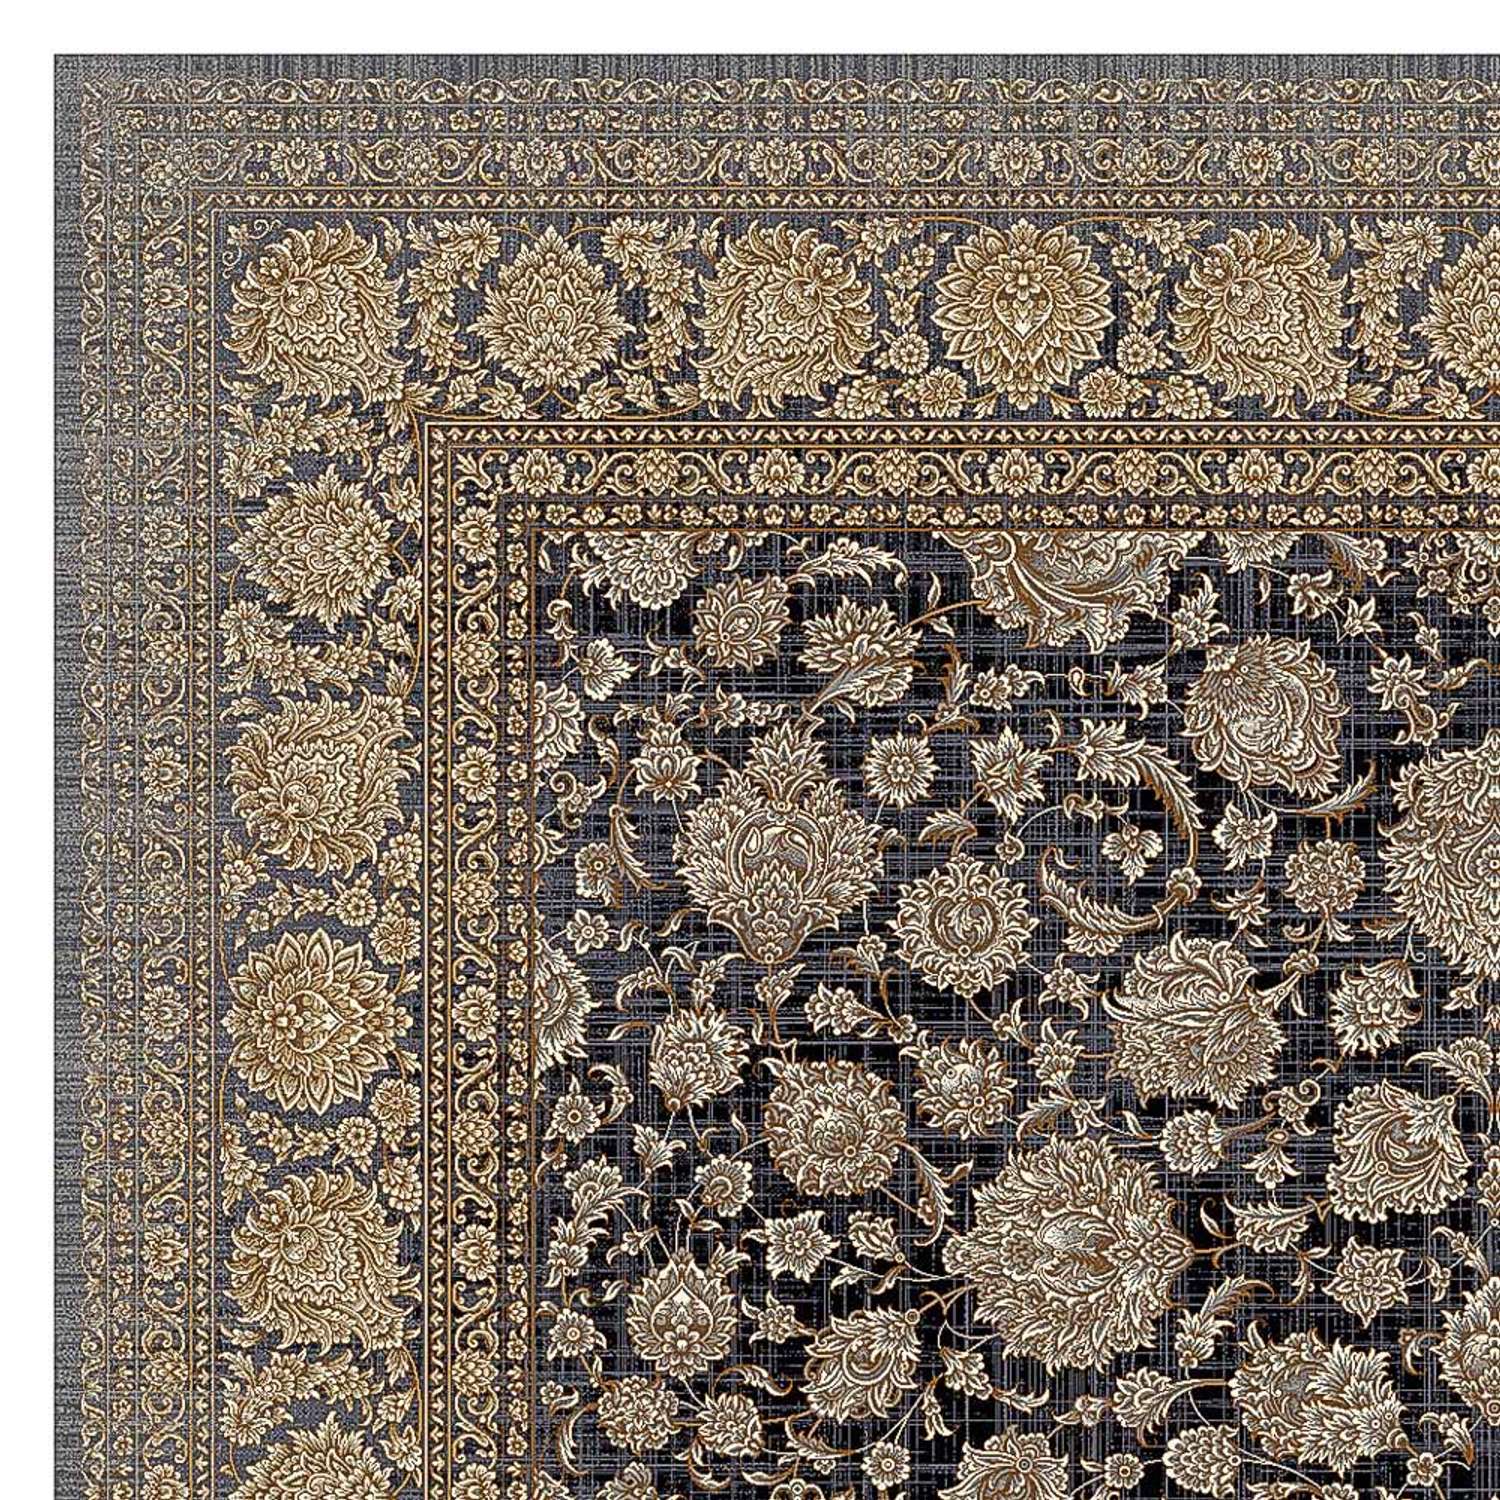 Oriental Woven Rug - Nomad's Oasis - rectangle